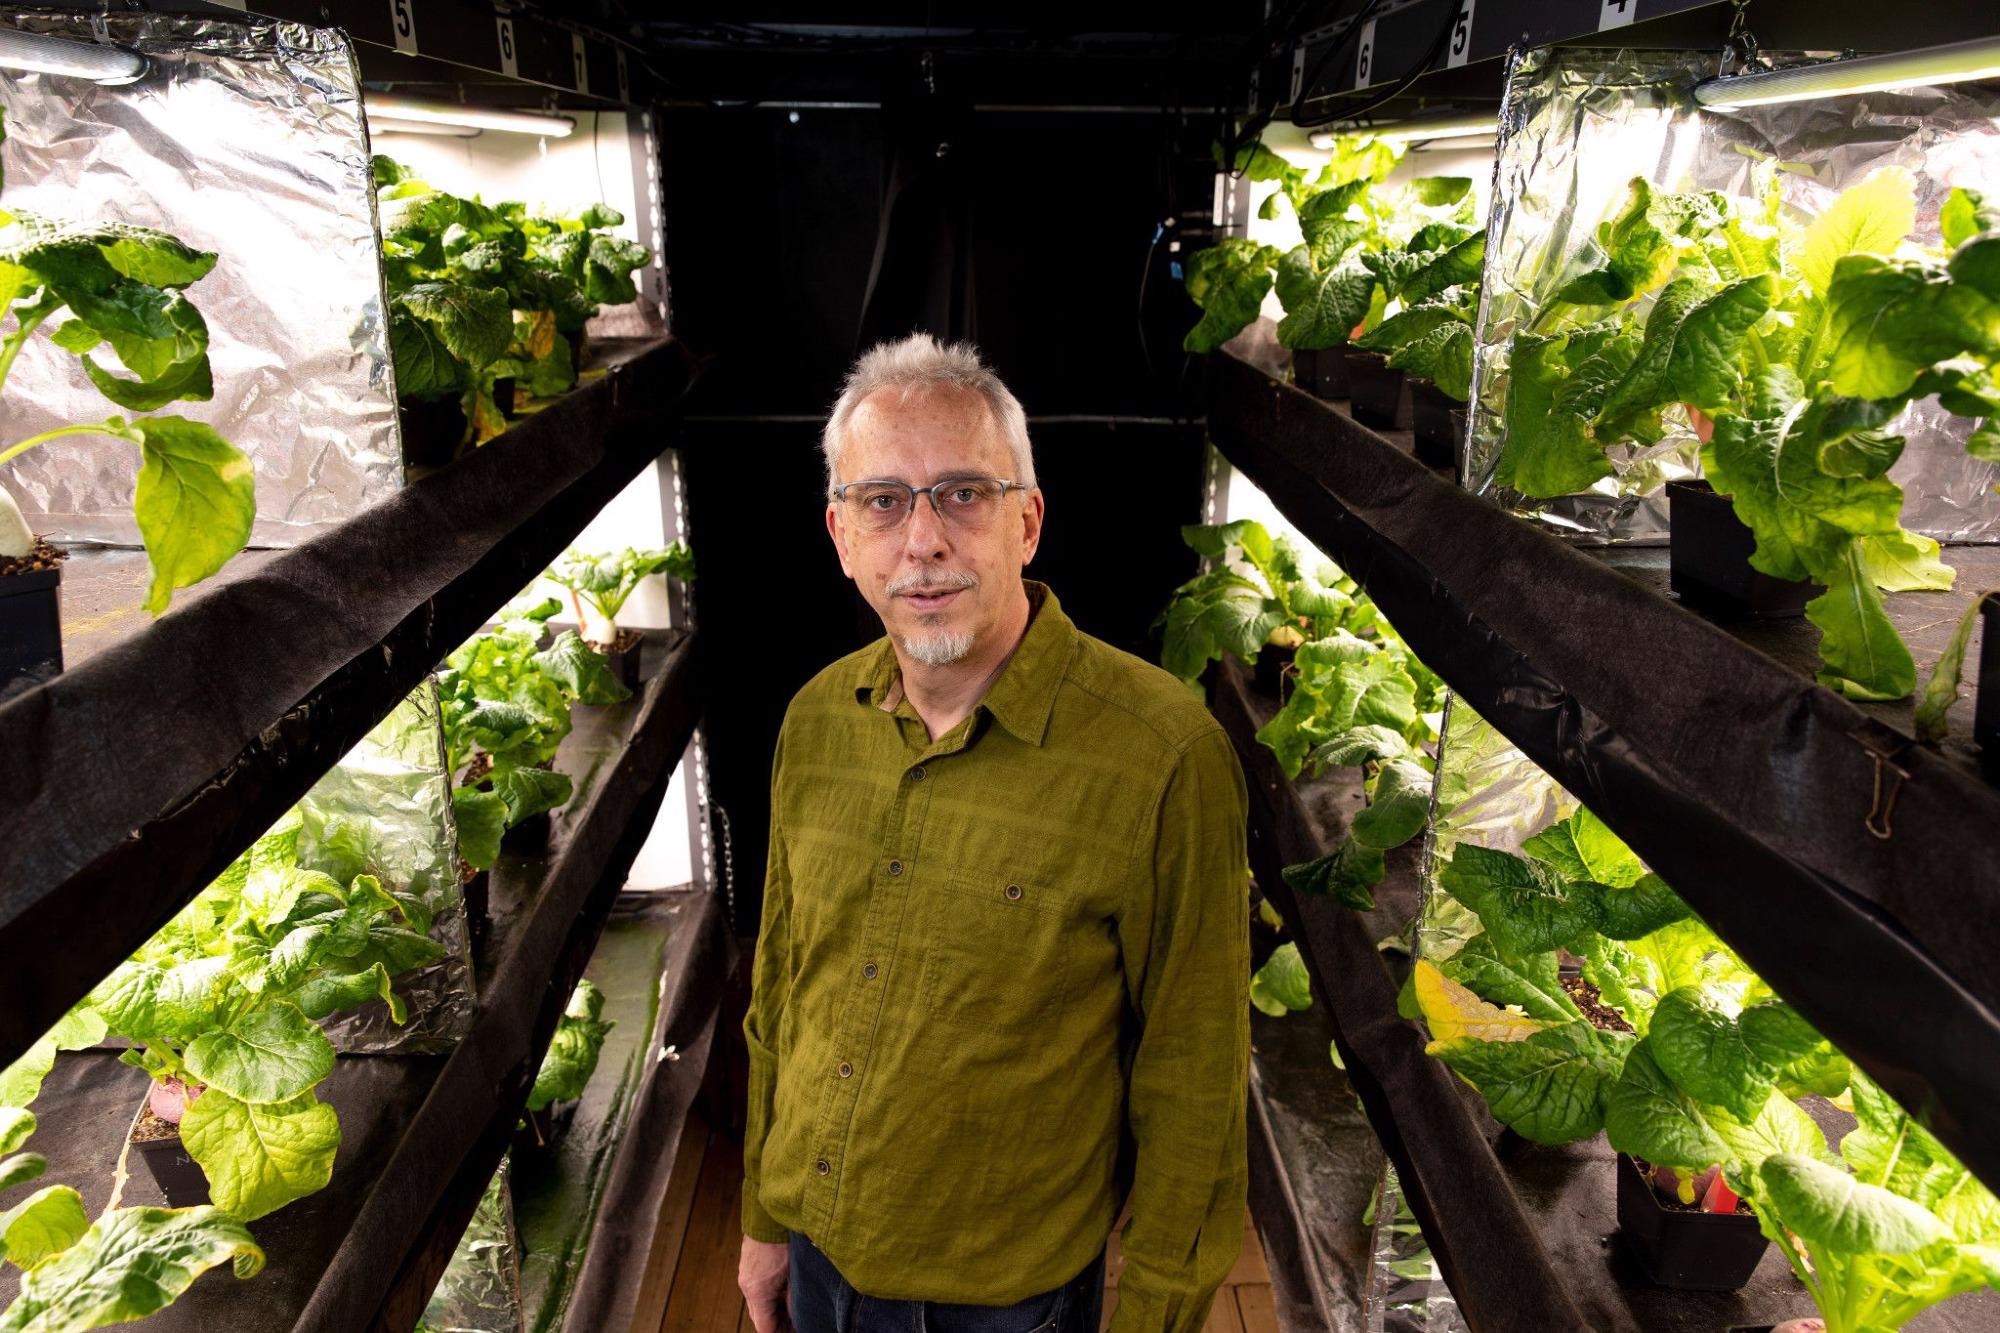 Marc Van Iersel among turnip plants in a grow room at his greenhouses.